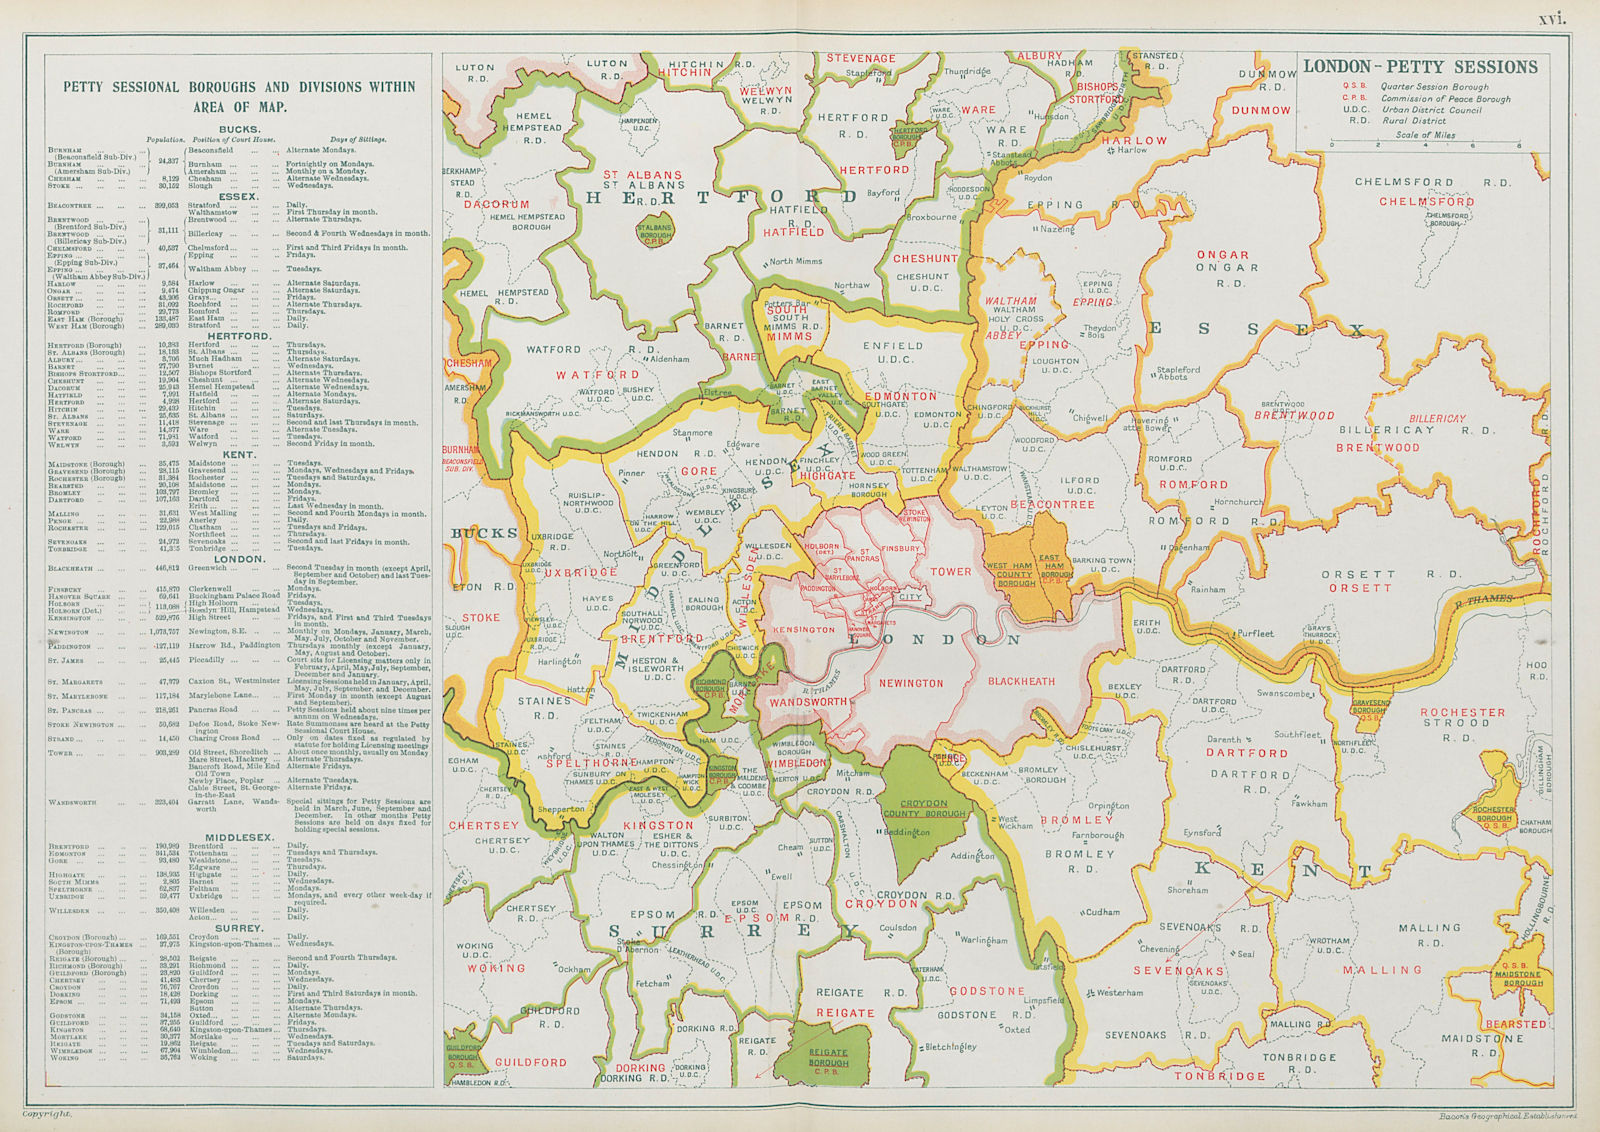 LONDON PETTY SESSIONS/sessional boroughs/divisions. Law. Courts. BACON 1913 map